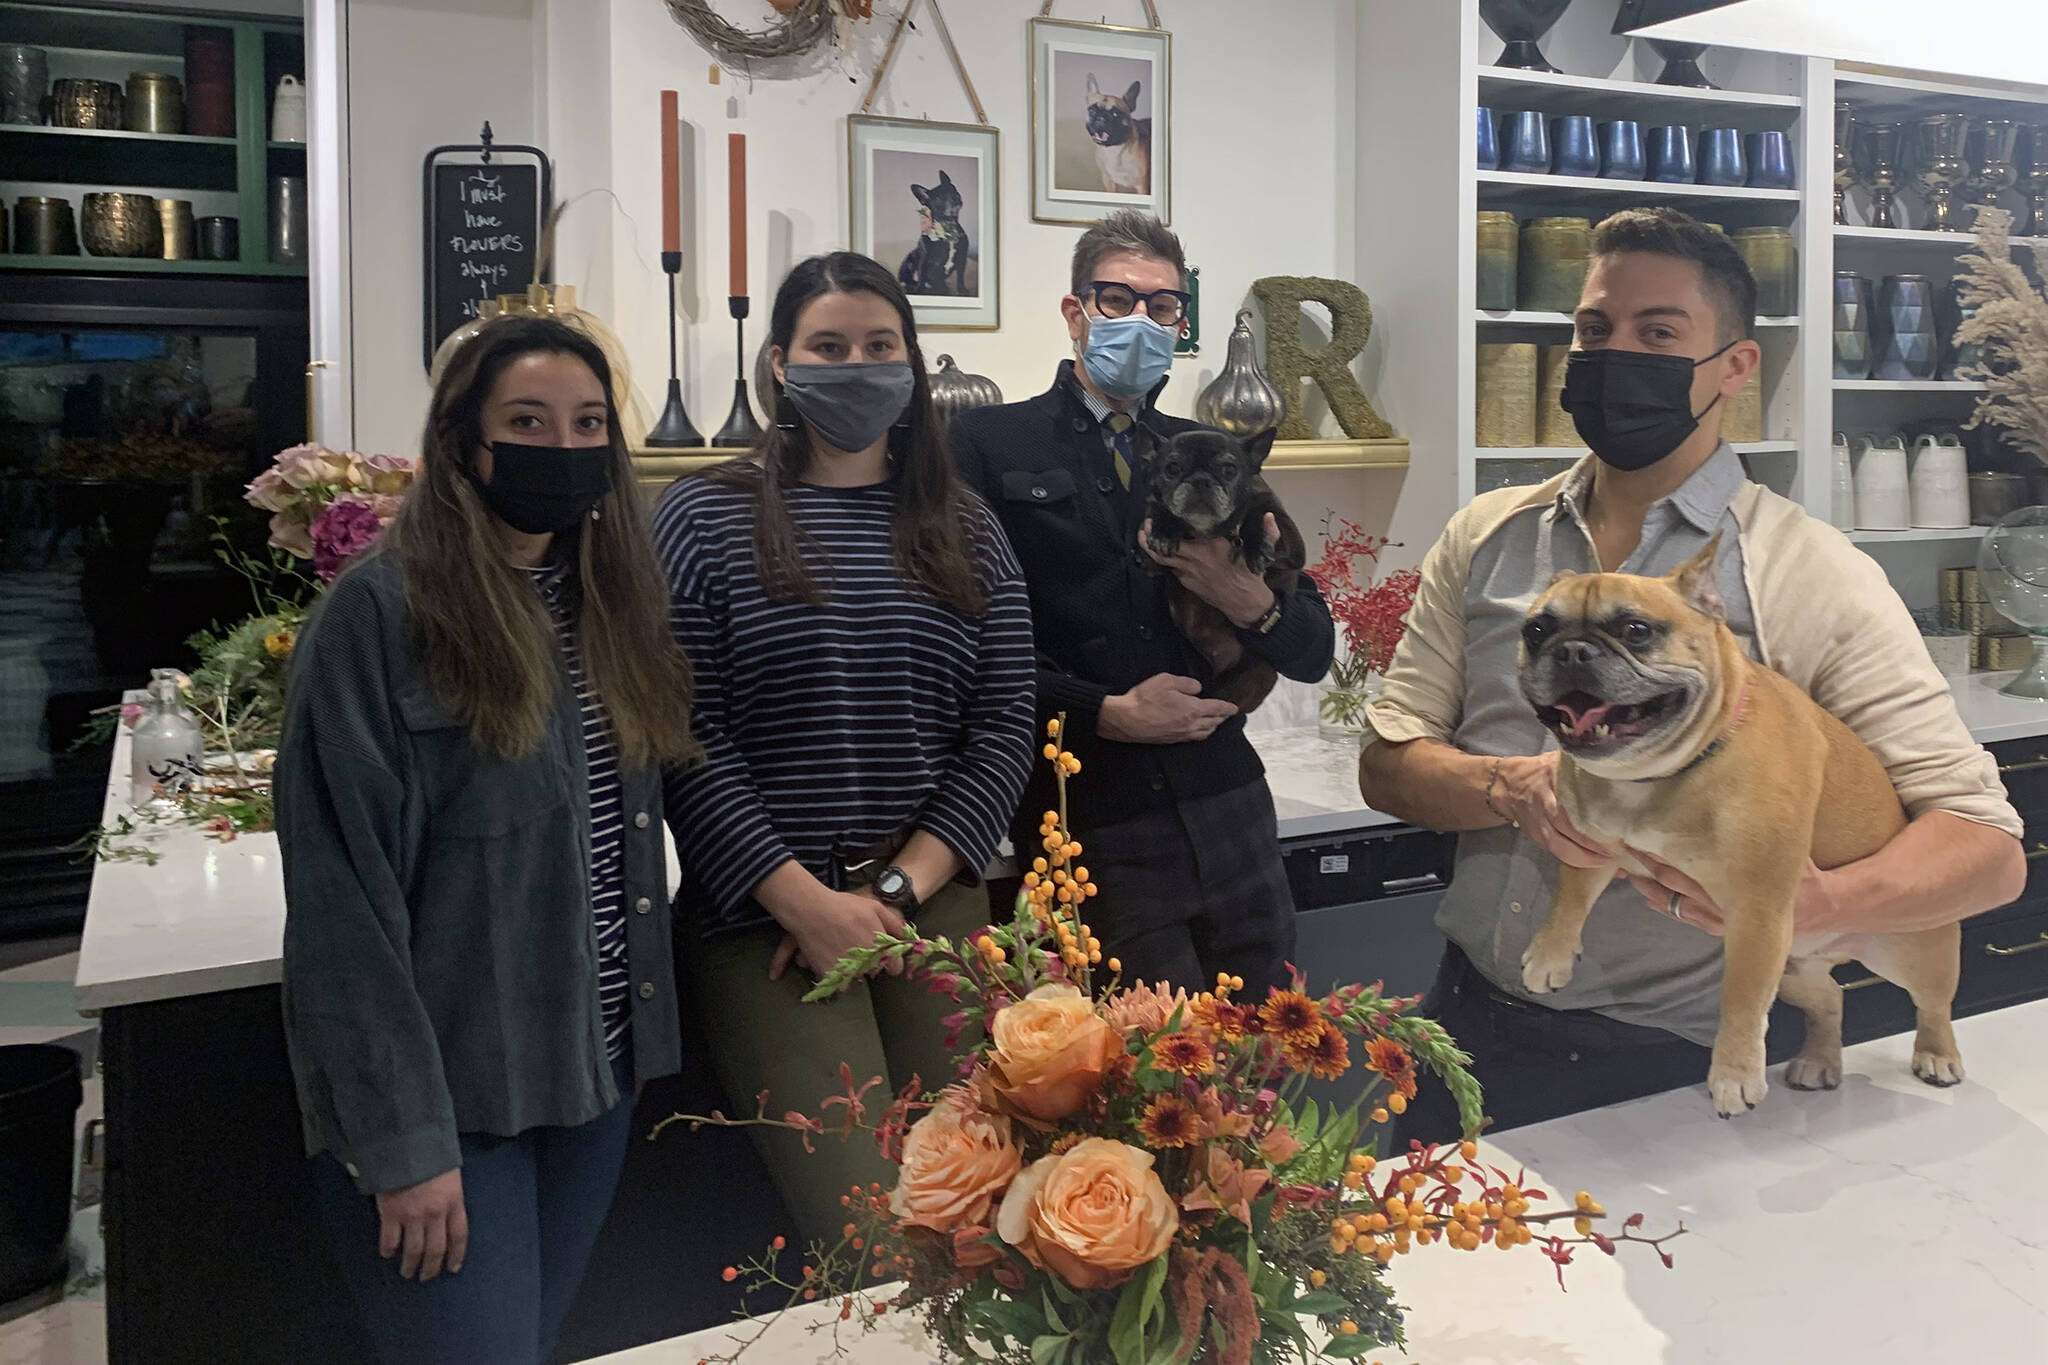 Dana Zigmund/Juneau Empire
The staff at Frenchie’s Floral Studio downtown takes a break from preparing Thanksgiving arrangements on Friday, Nov. 12. Florist Heather Alducin, (left), floral designer, Nikki Box, (second left), stand with shop owners Jeremy Bauer, (center right), and Jason Clifton, (right). French bulldogs George (held by Bauer) and Gracie (on table), served as the inspiration for the shop’s name.